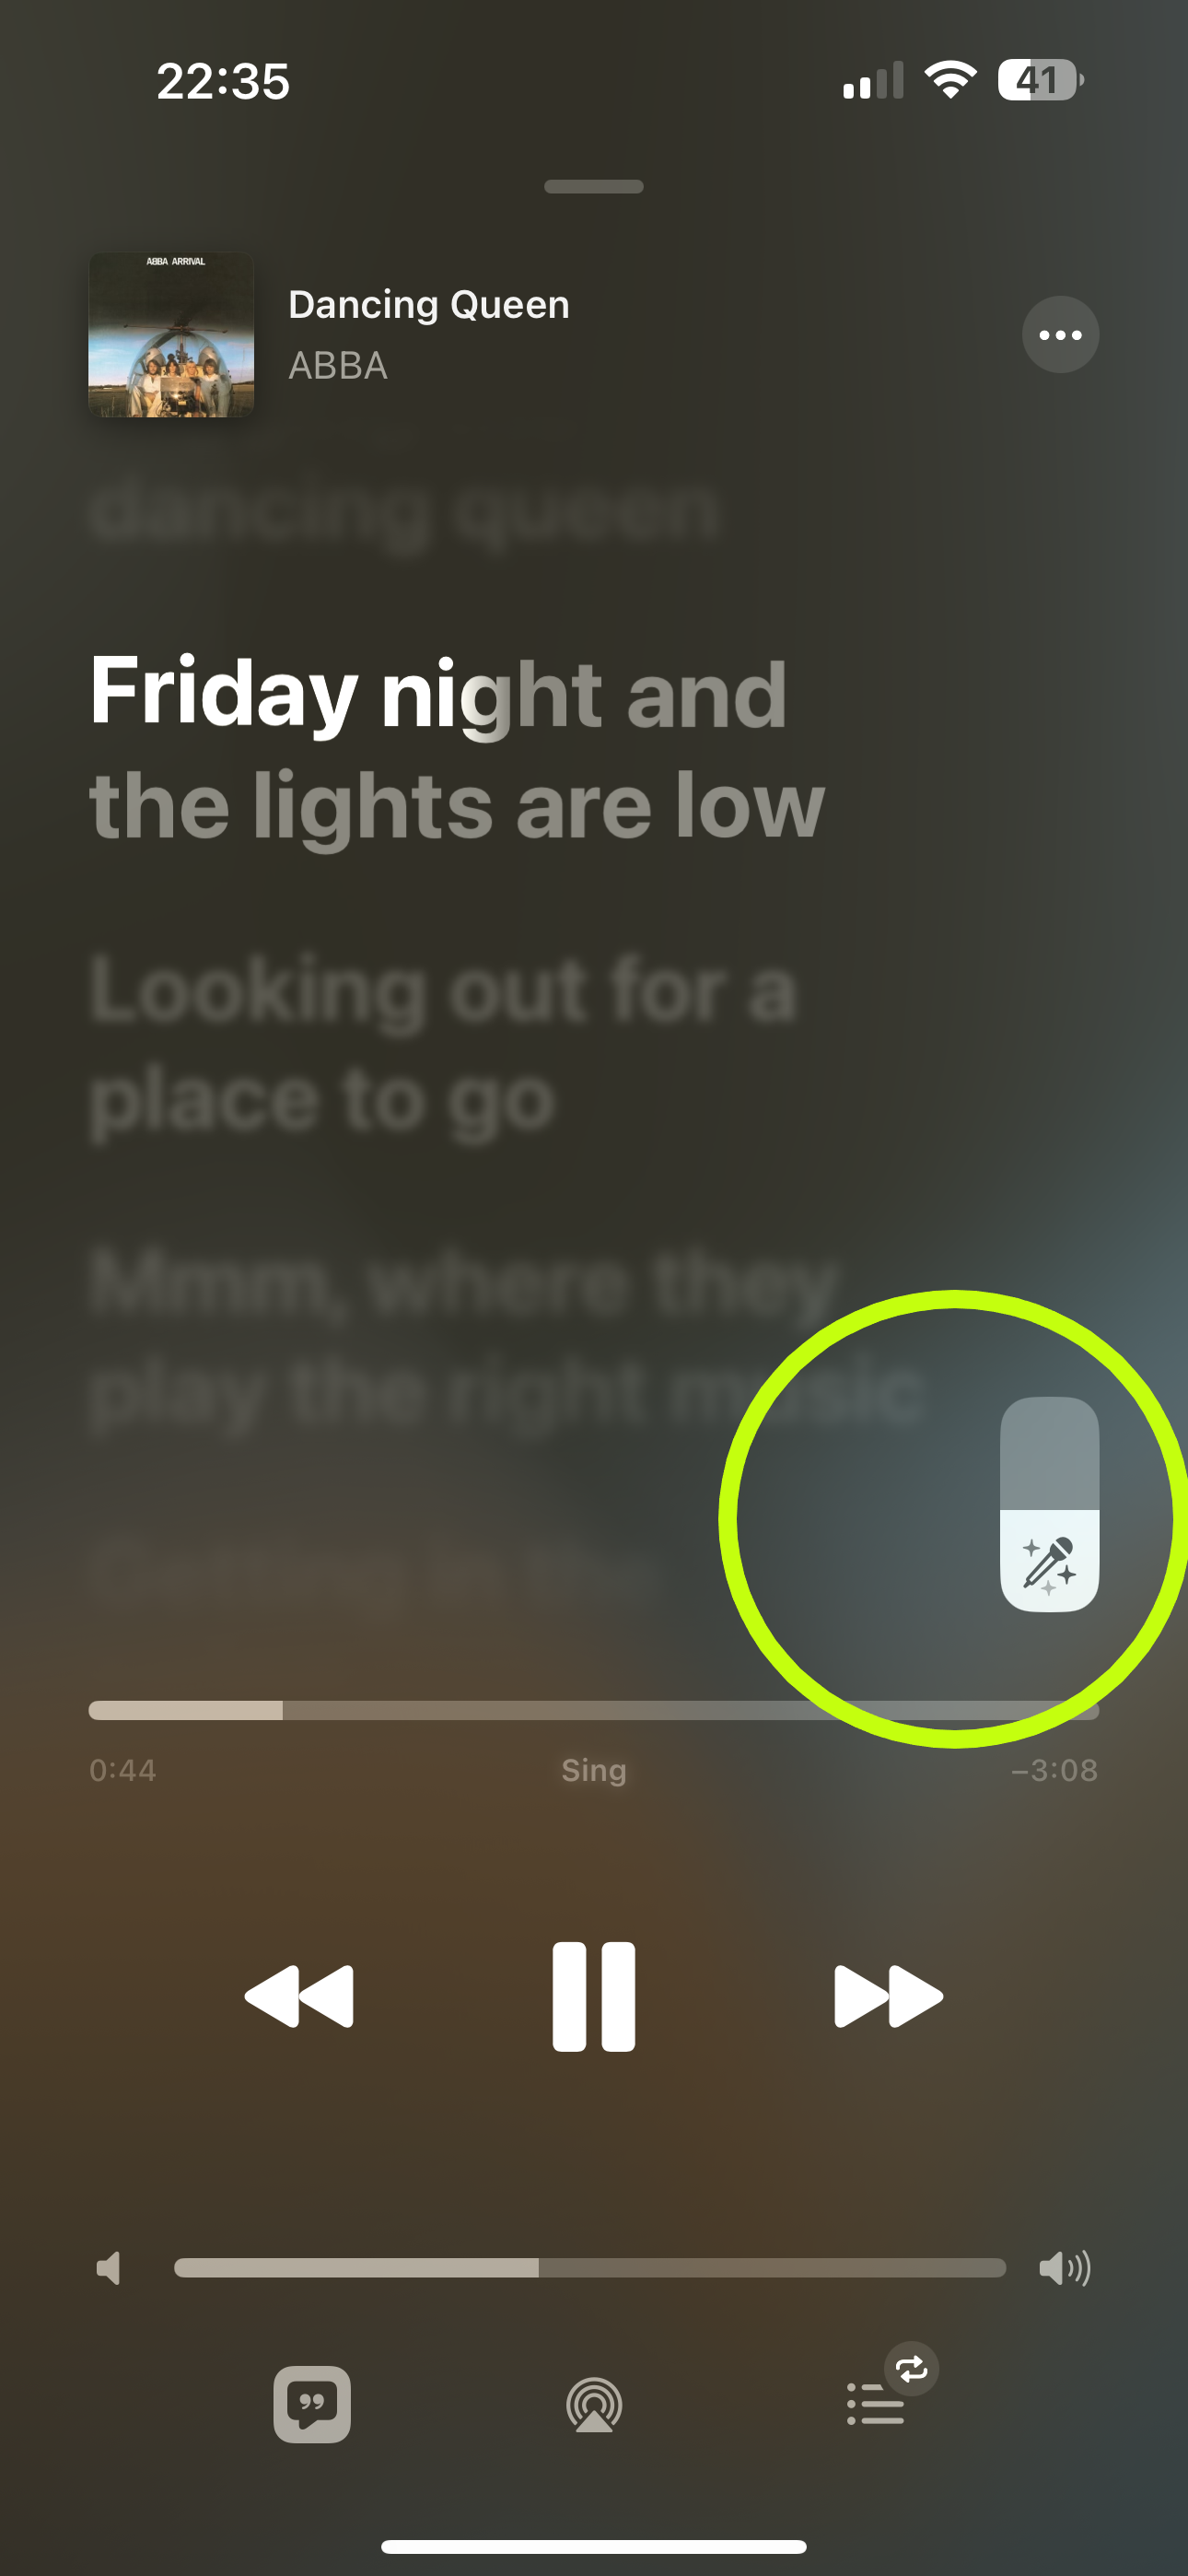 How to use the Sing karaoke feature in Apple Music